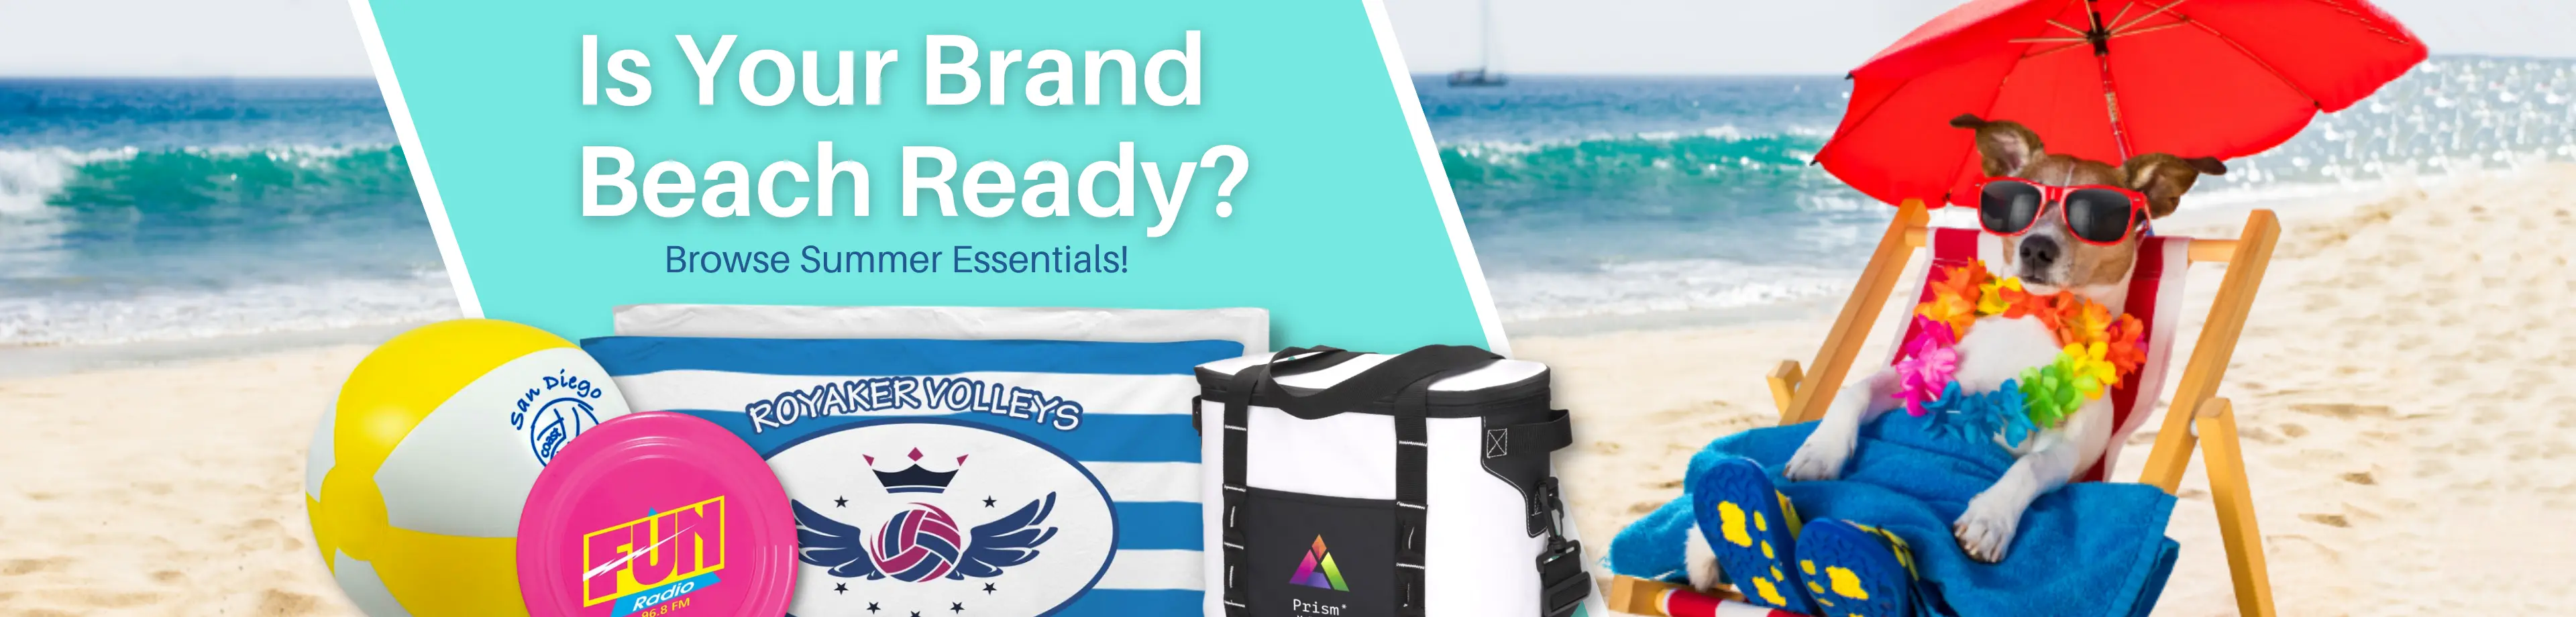 Summer Essentials are here to get your brand awareness out into the sun this season!